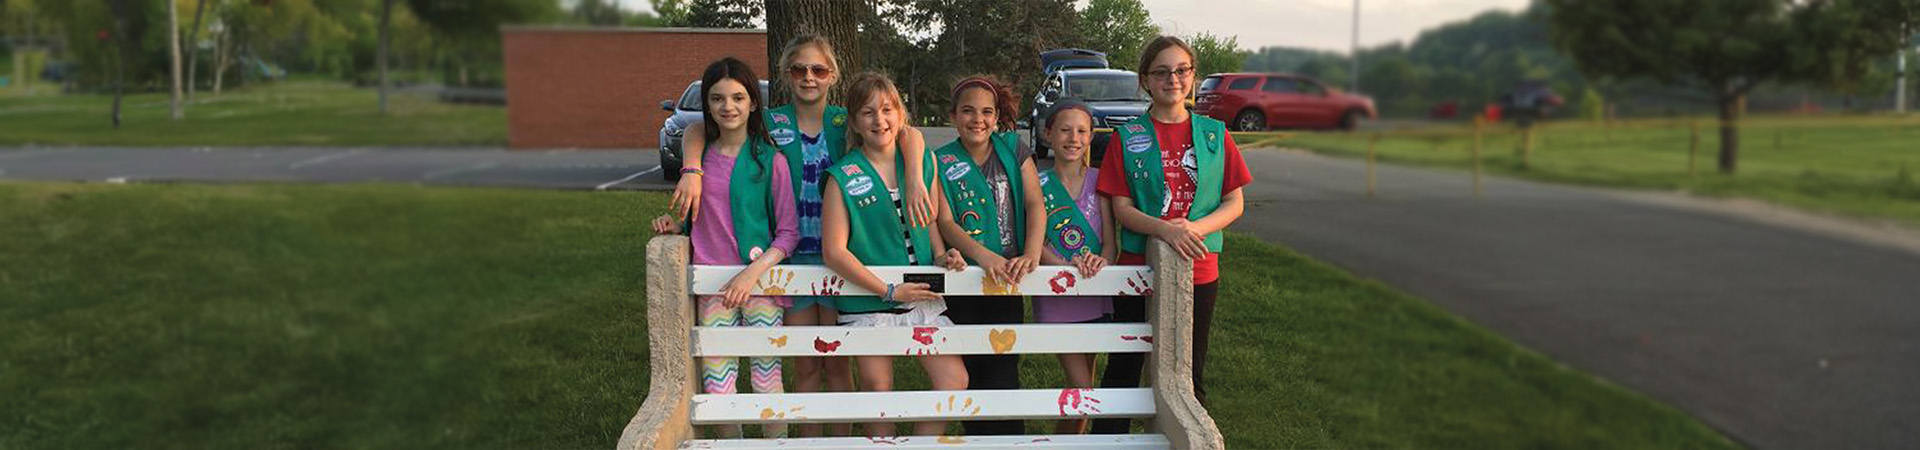  Girl Scouts show off their awesome Buddy Bench at Cumru Elementary in Eastern Pennsylvania. 